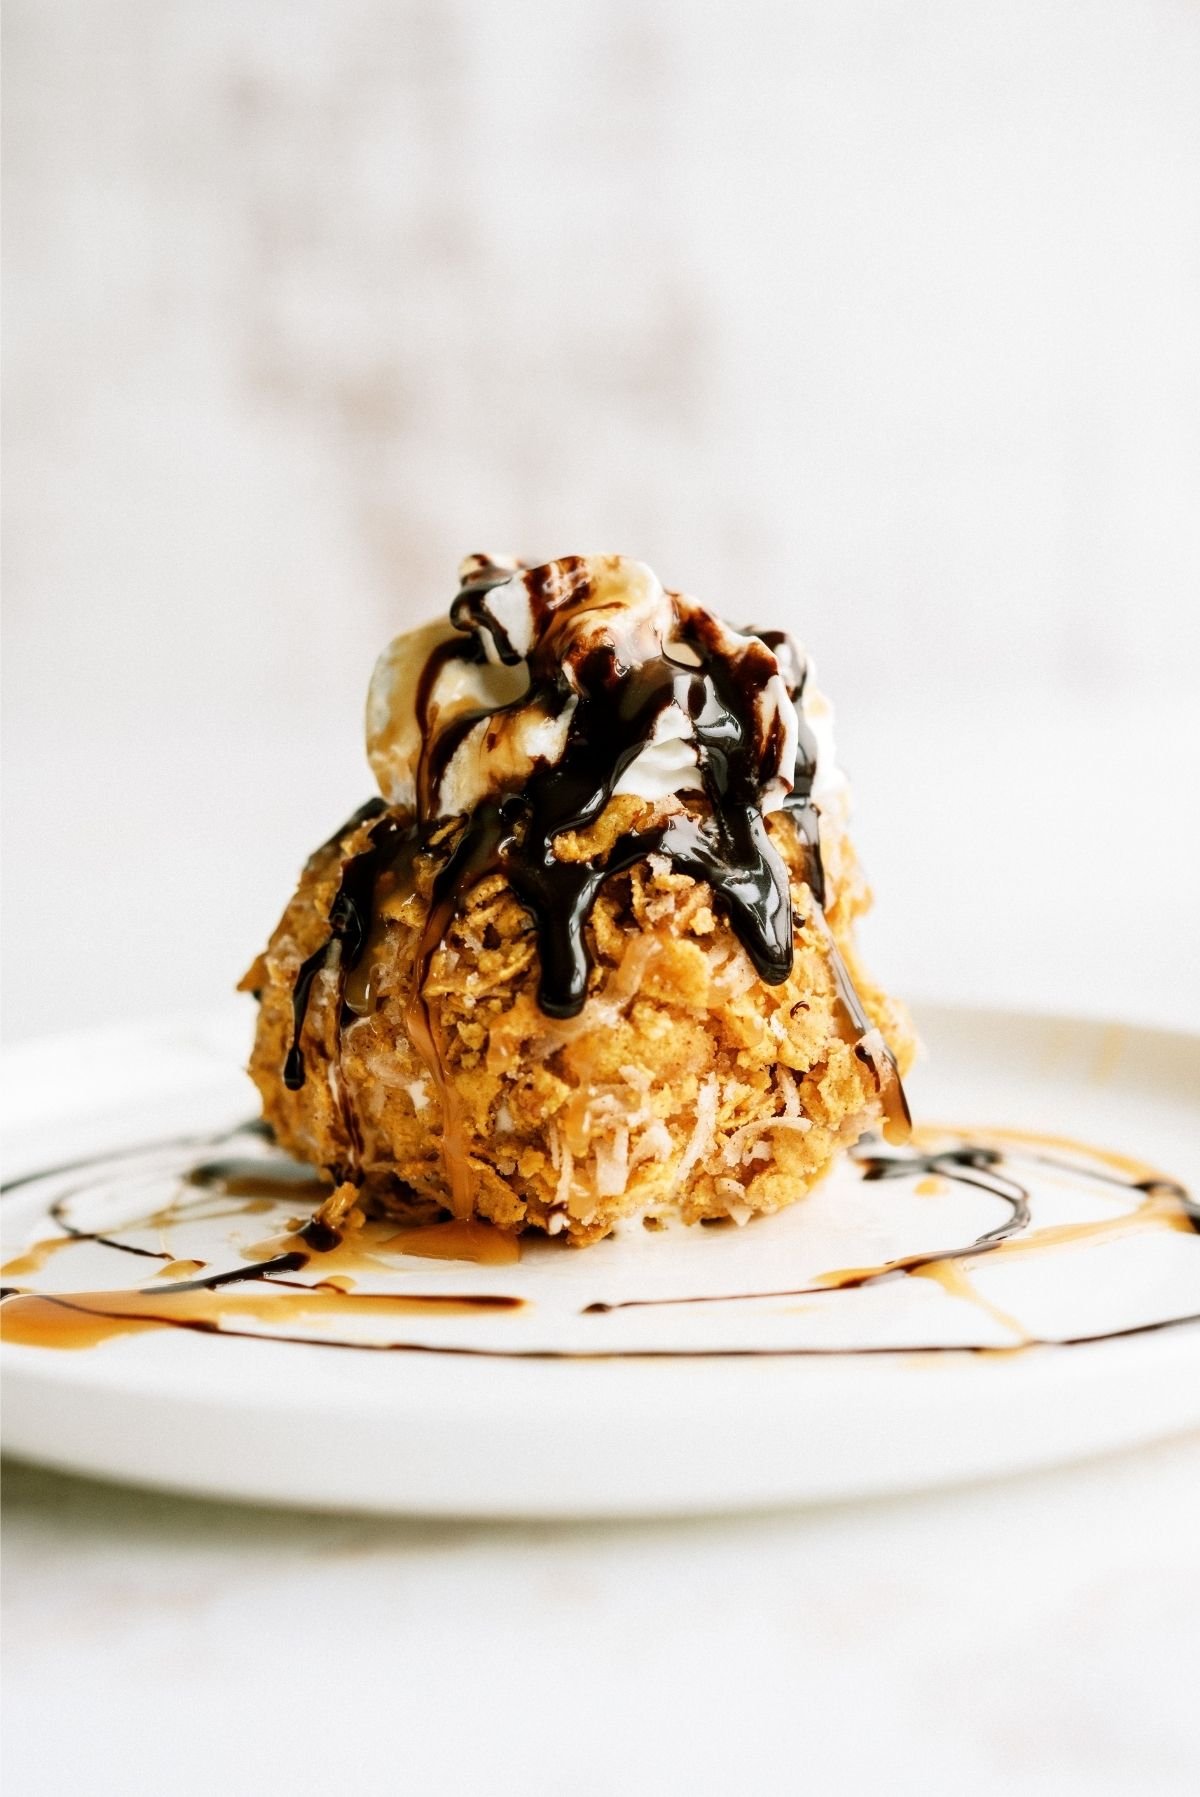 Homemade Fried Ice Cream (without the frying) Recipe